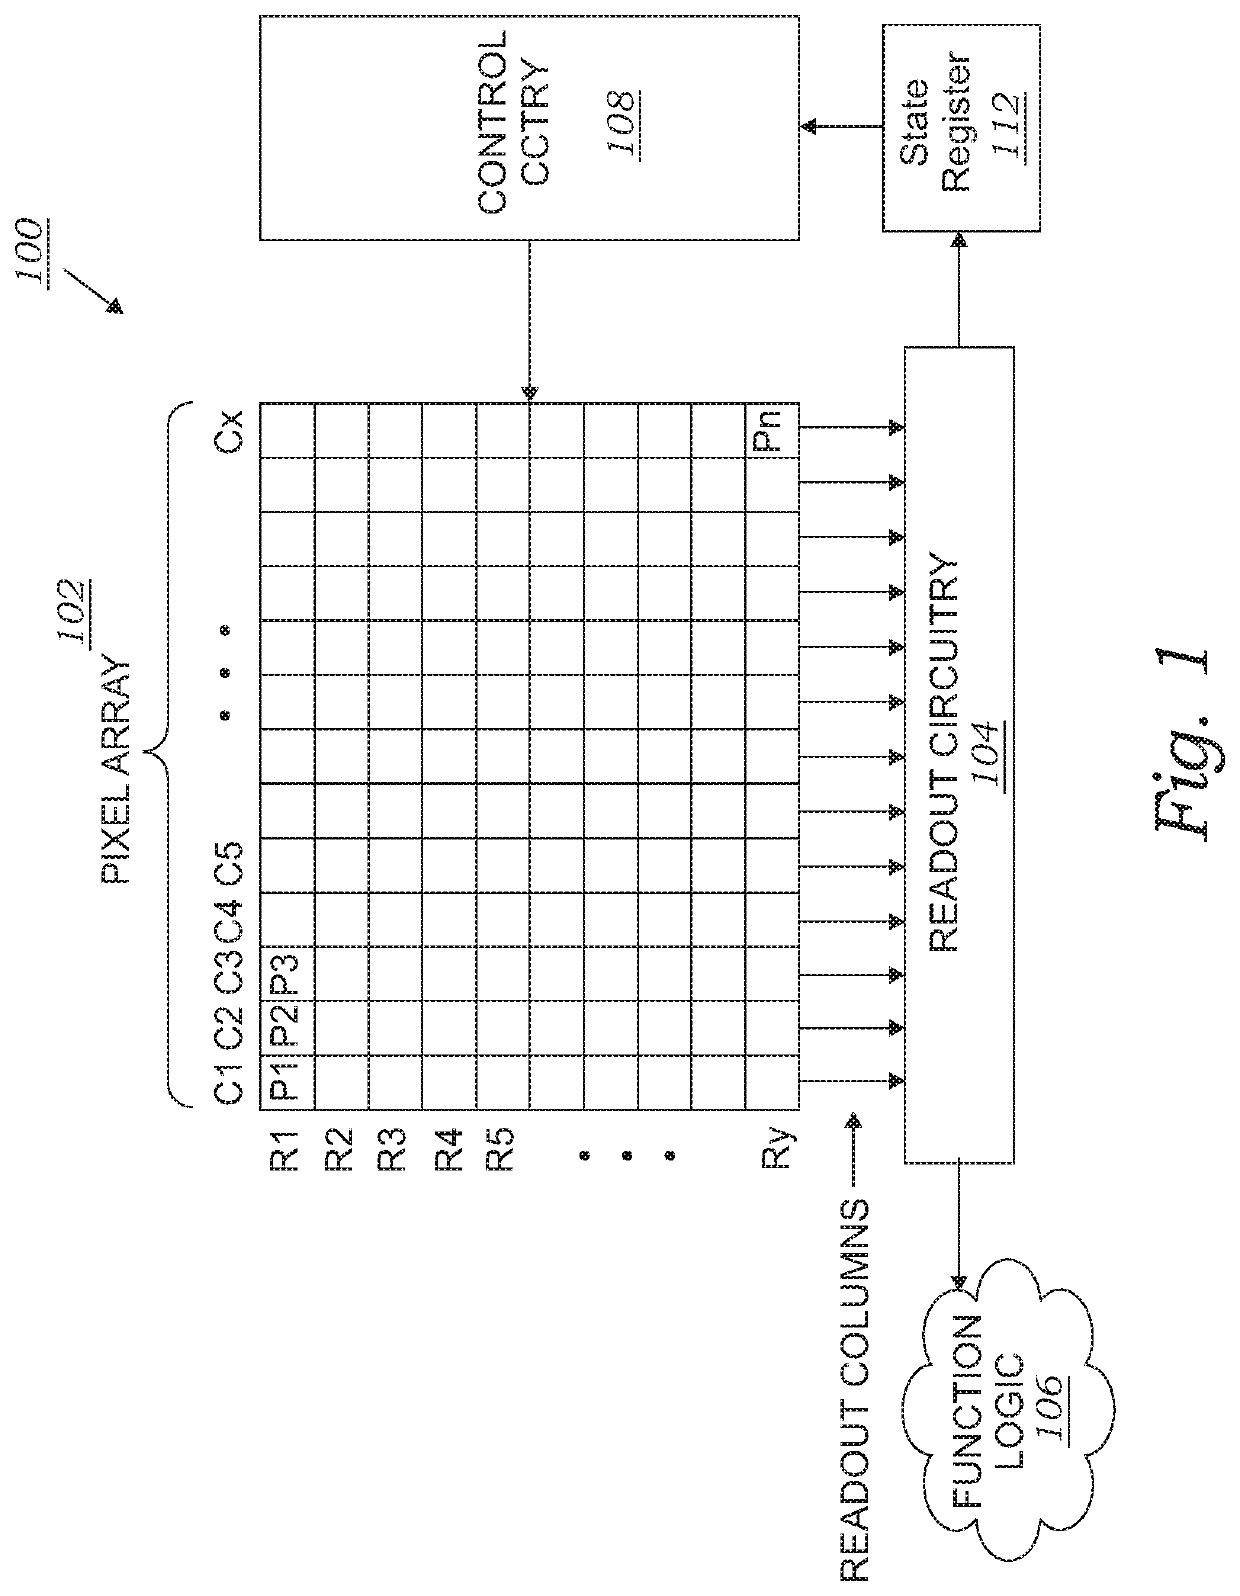 CMOS image sensor with improved column data shift readout